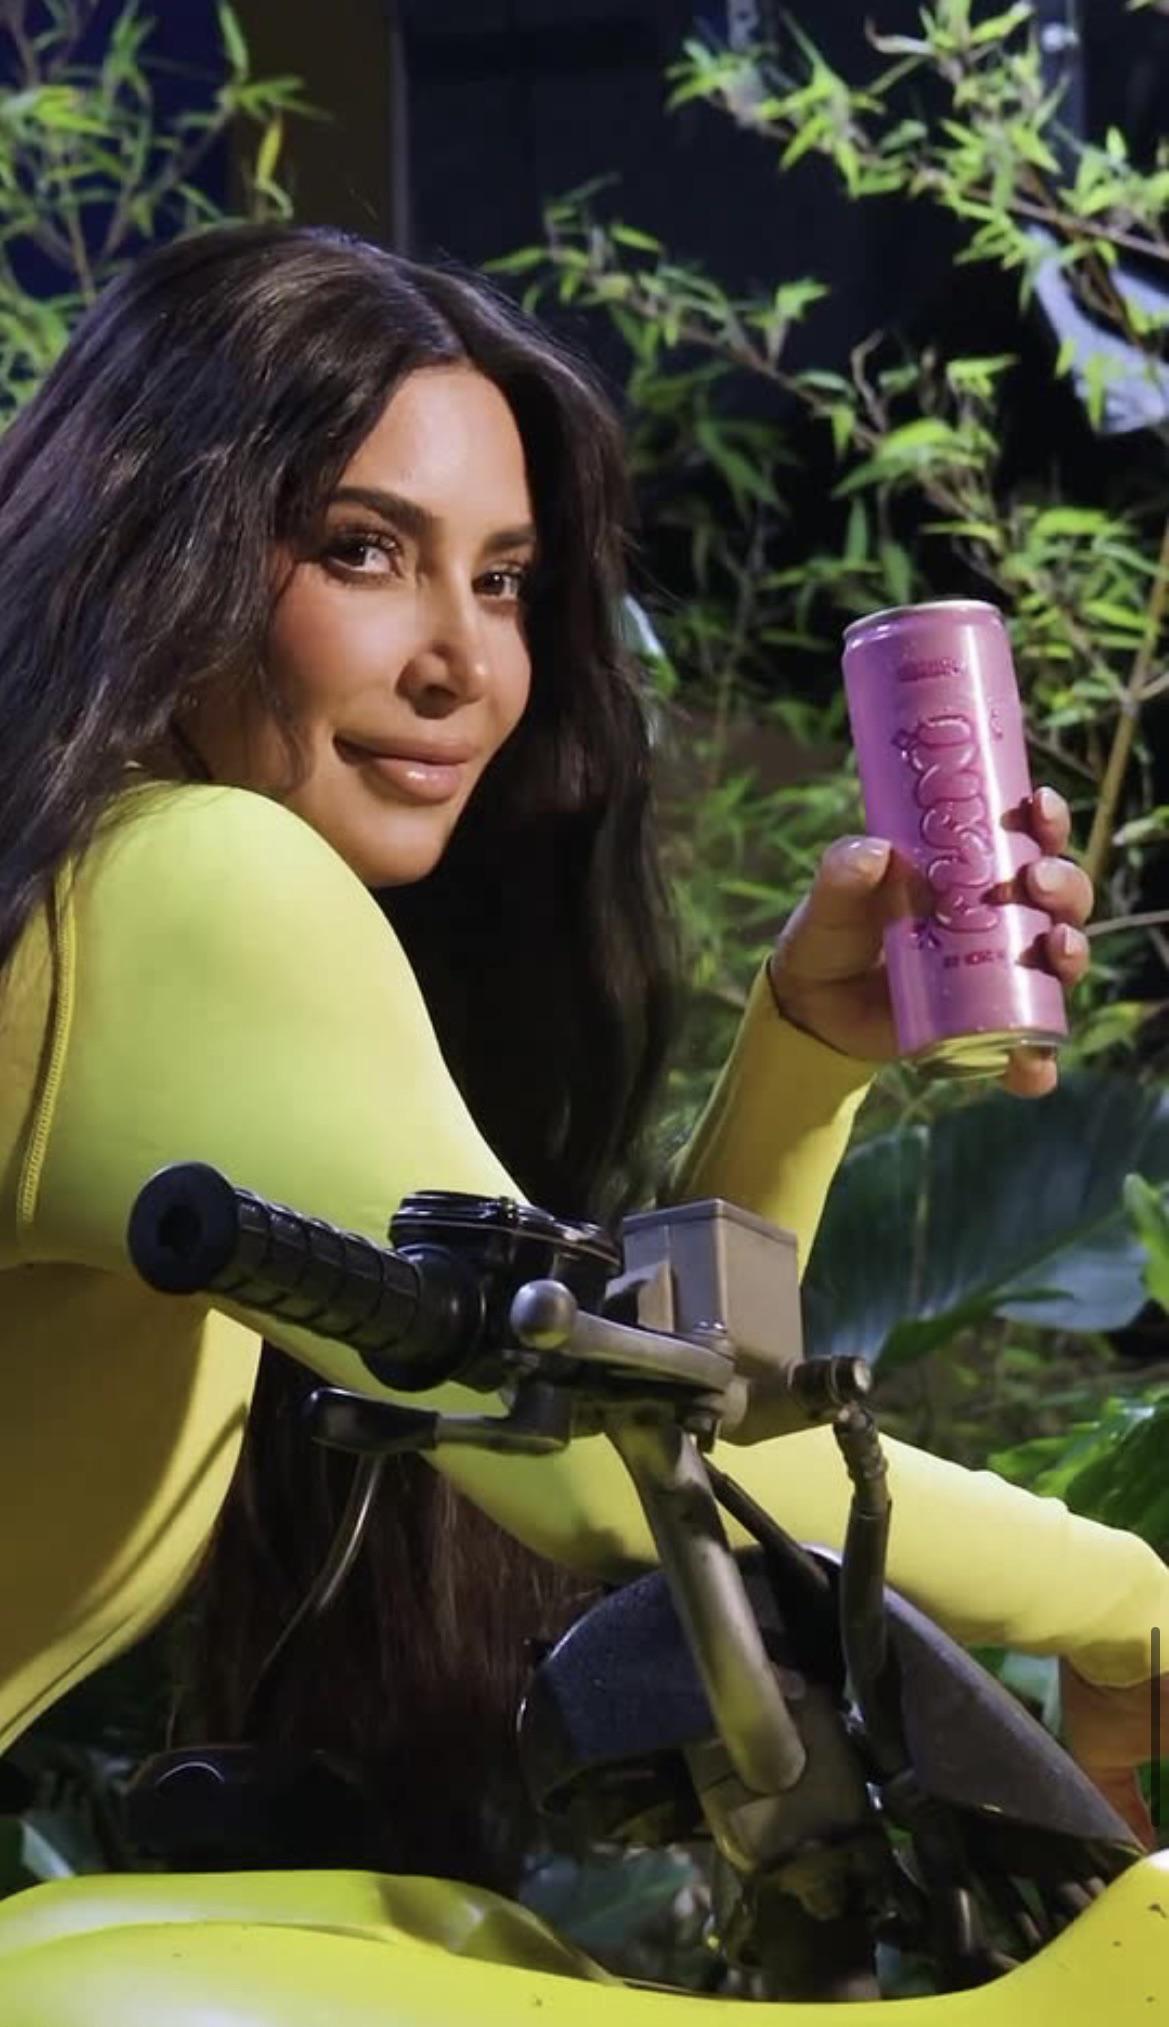 Kim donned a skintight yellow bodysuit while straddling a motorcycle in another eye-catching Alani ad